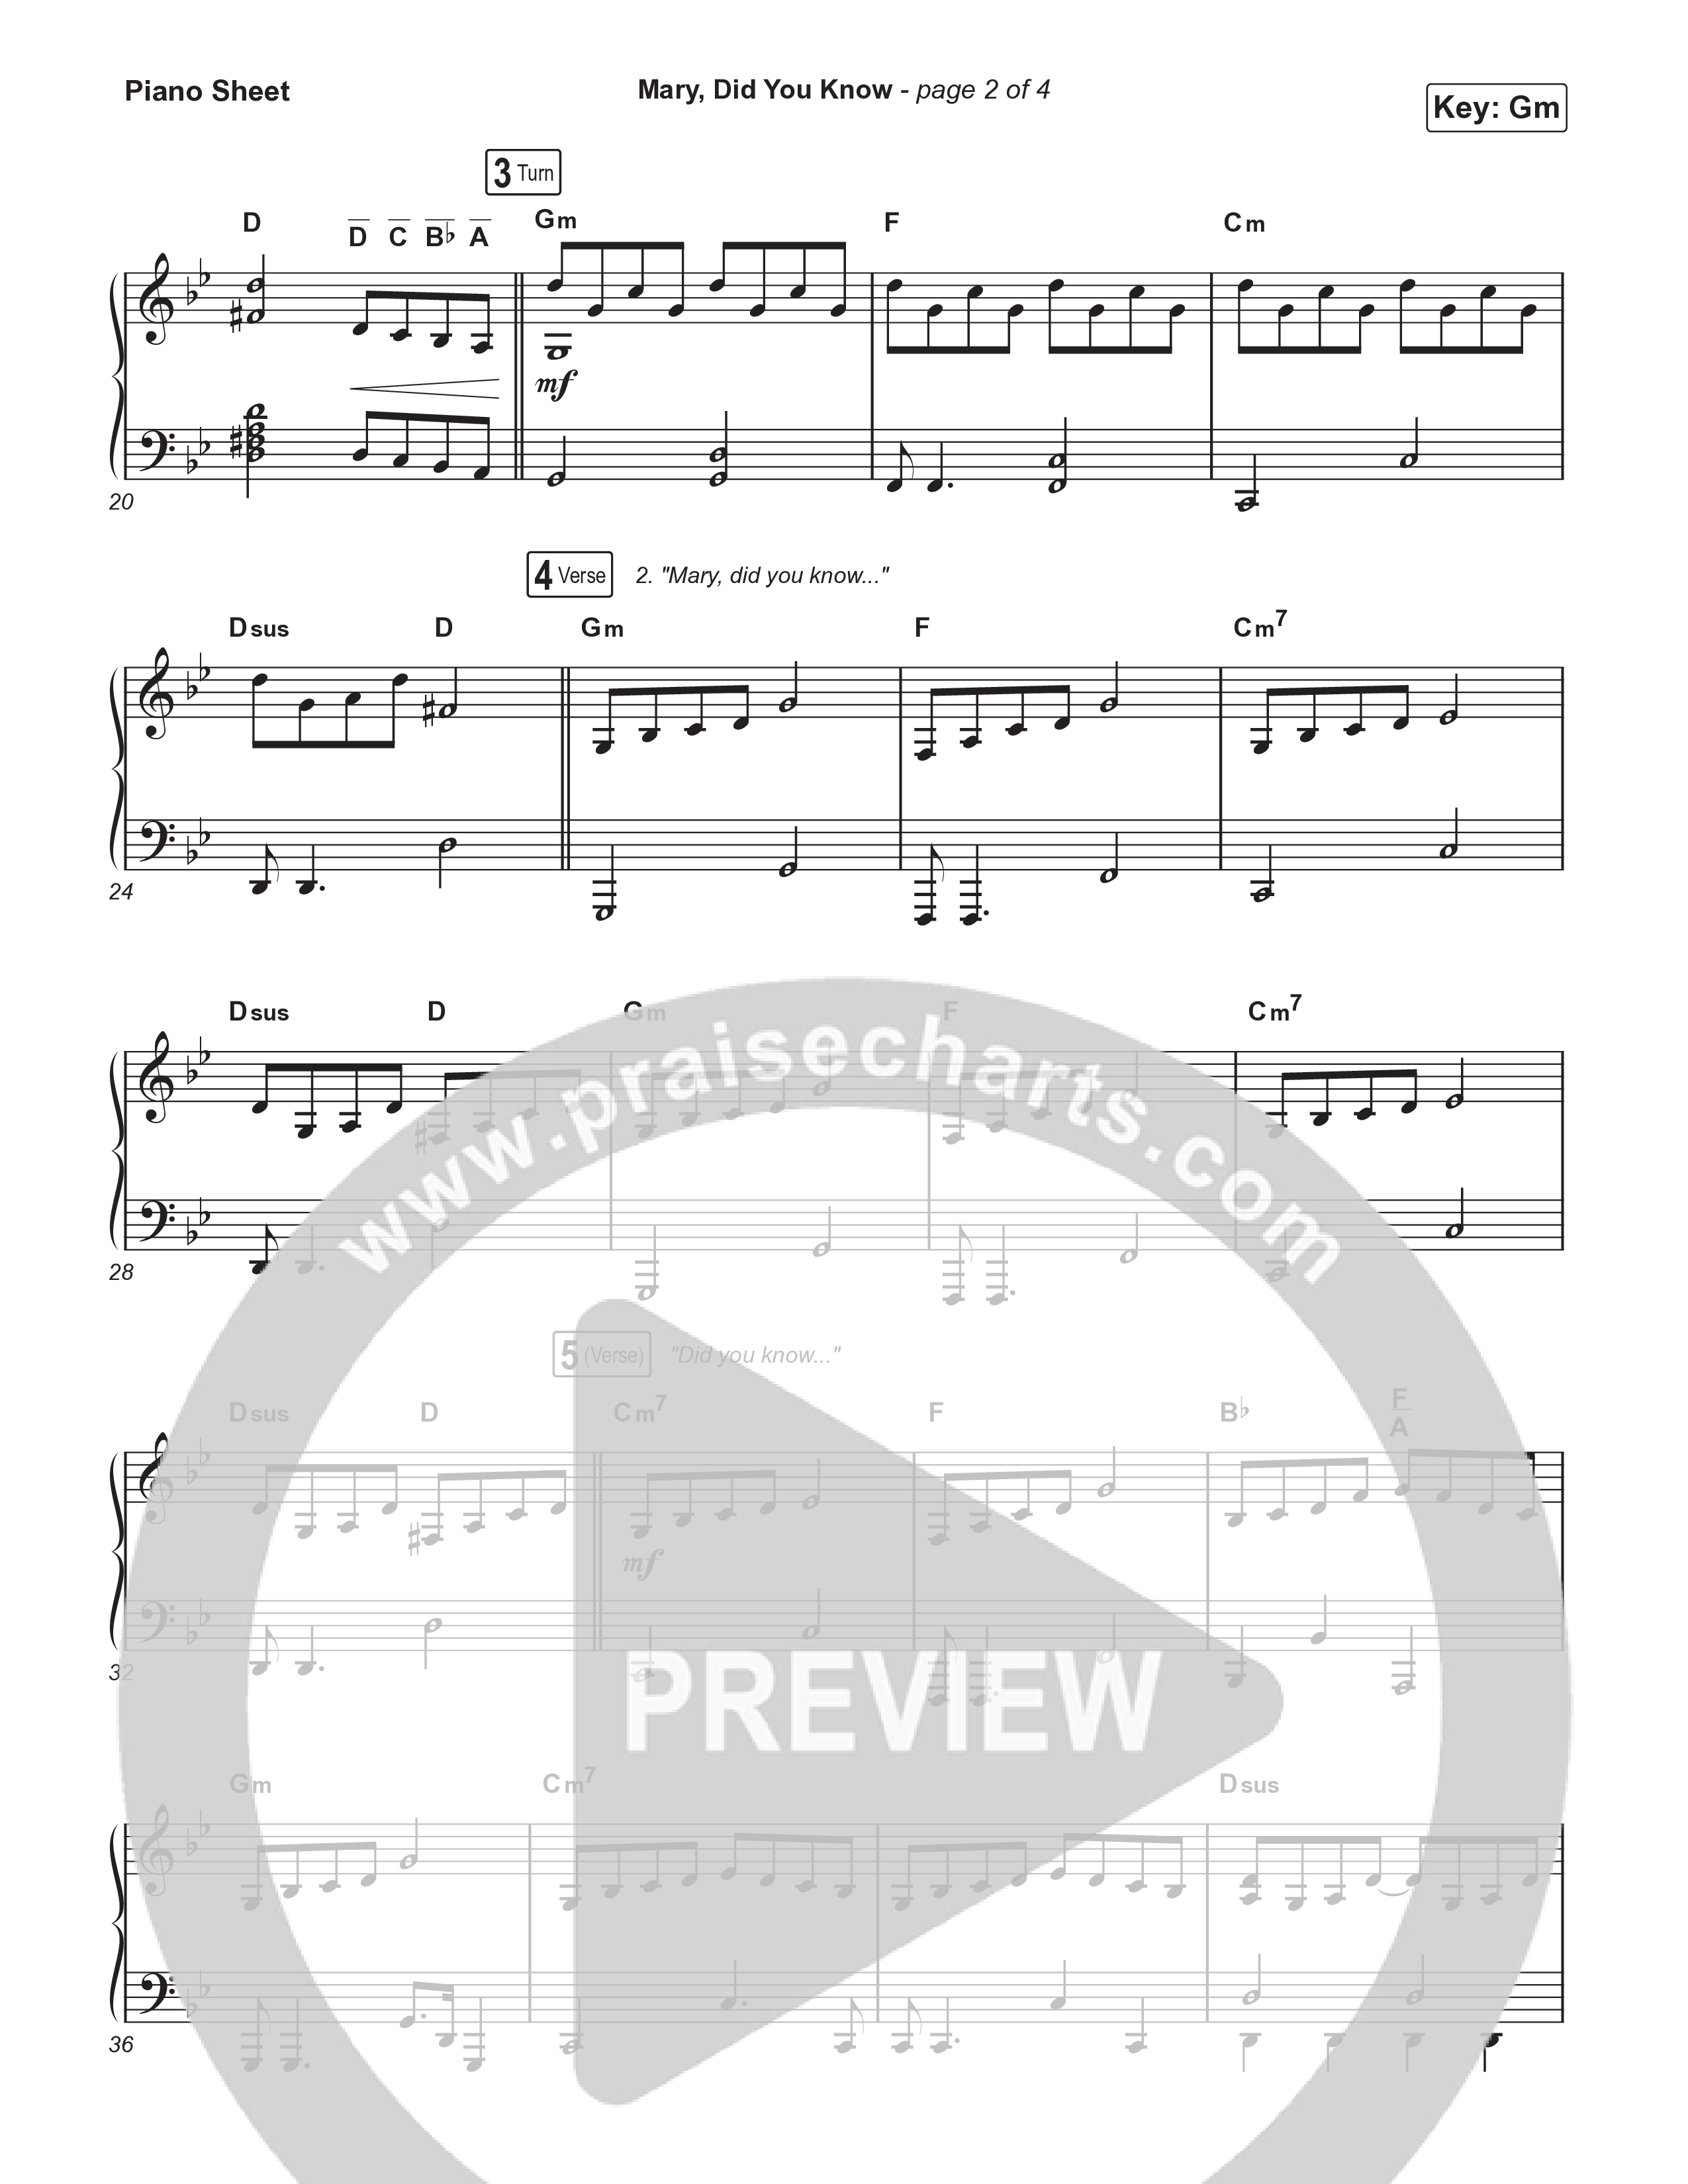 Mary Did You Know (Choral Anthem SATB) Piano Sheet (Anne Wilson / Arr. Luke Gambill)